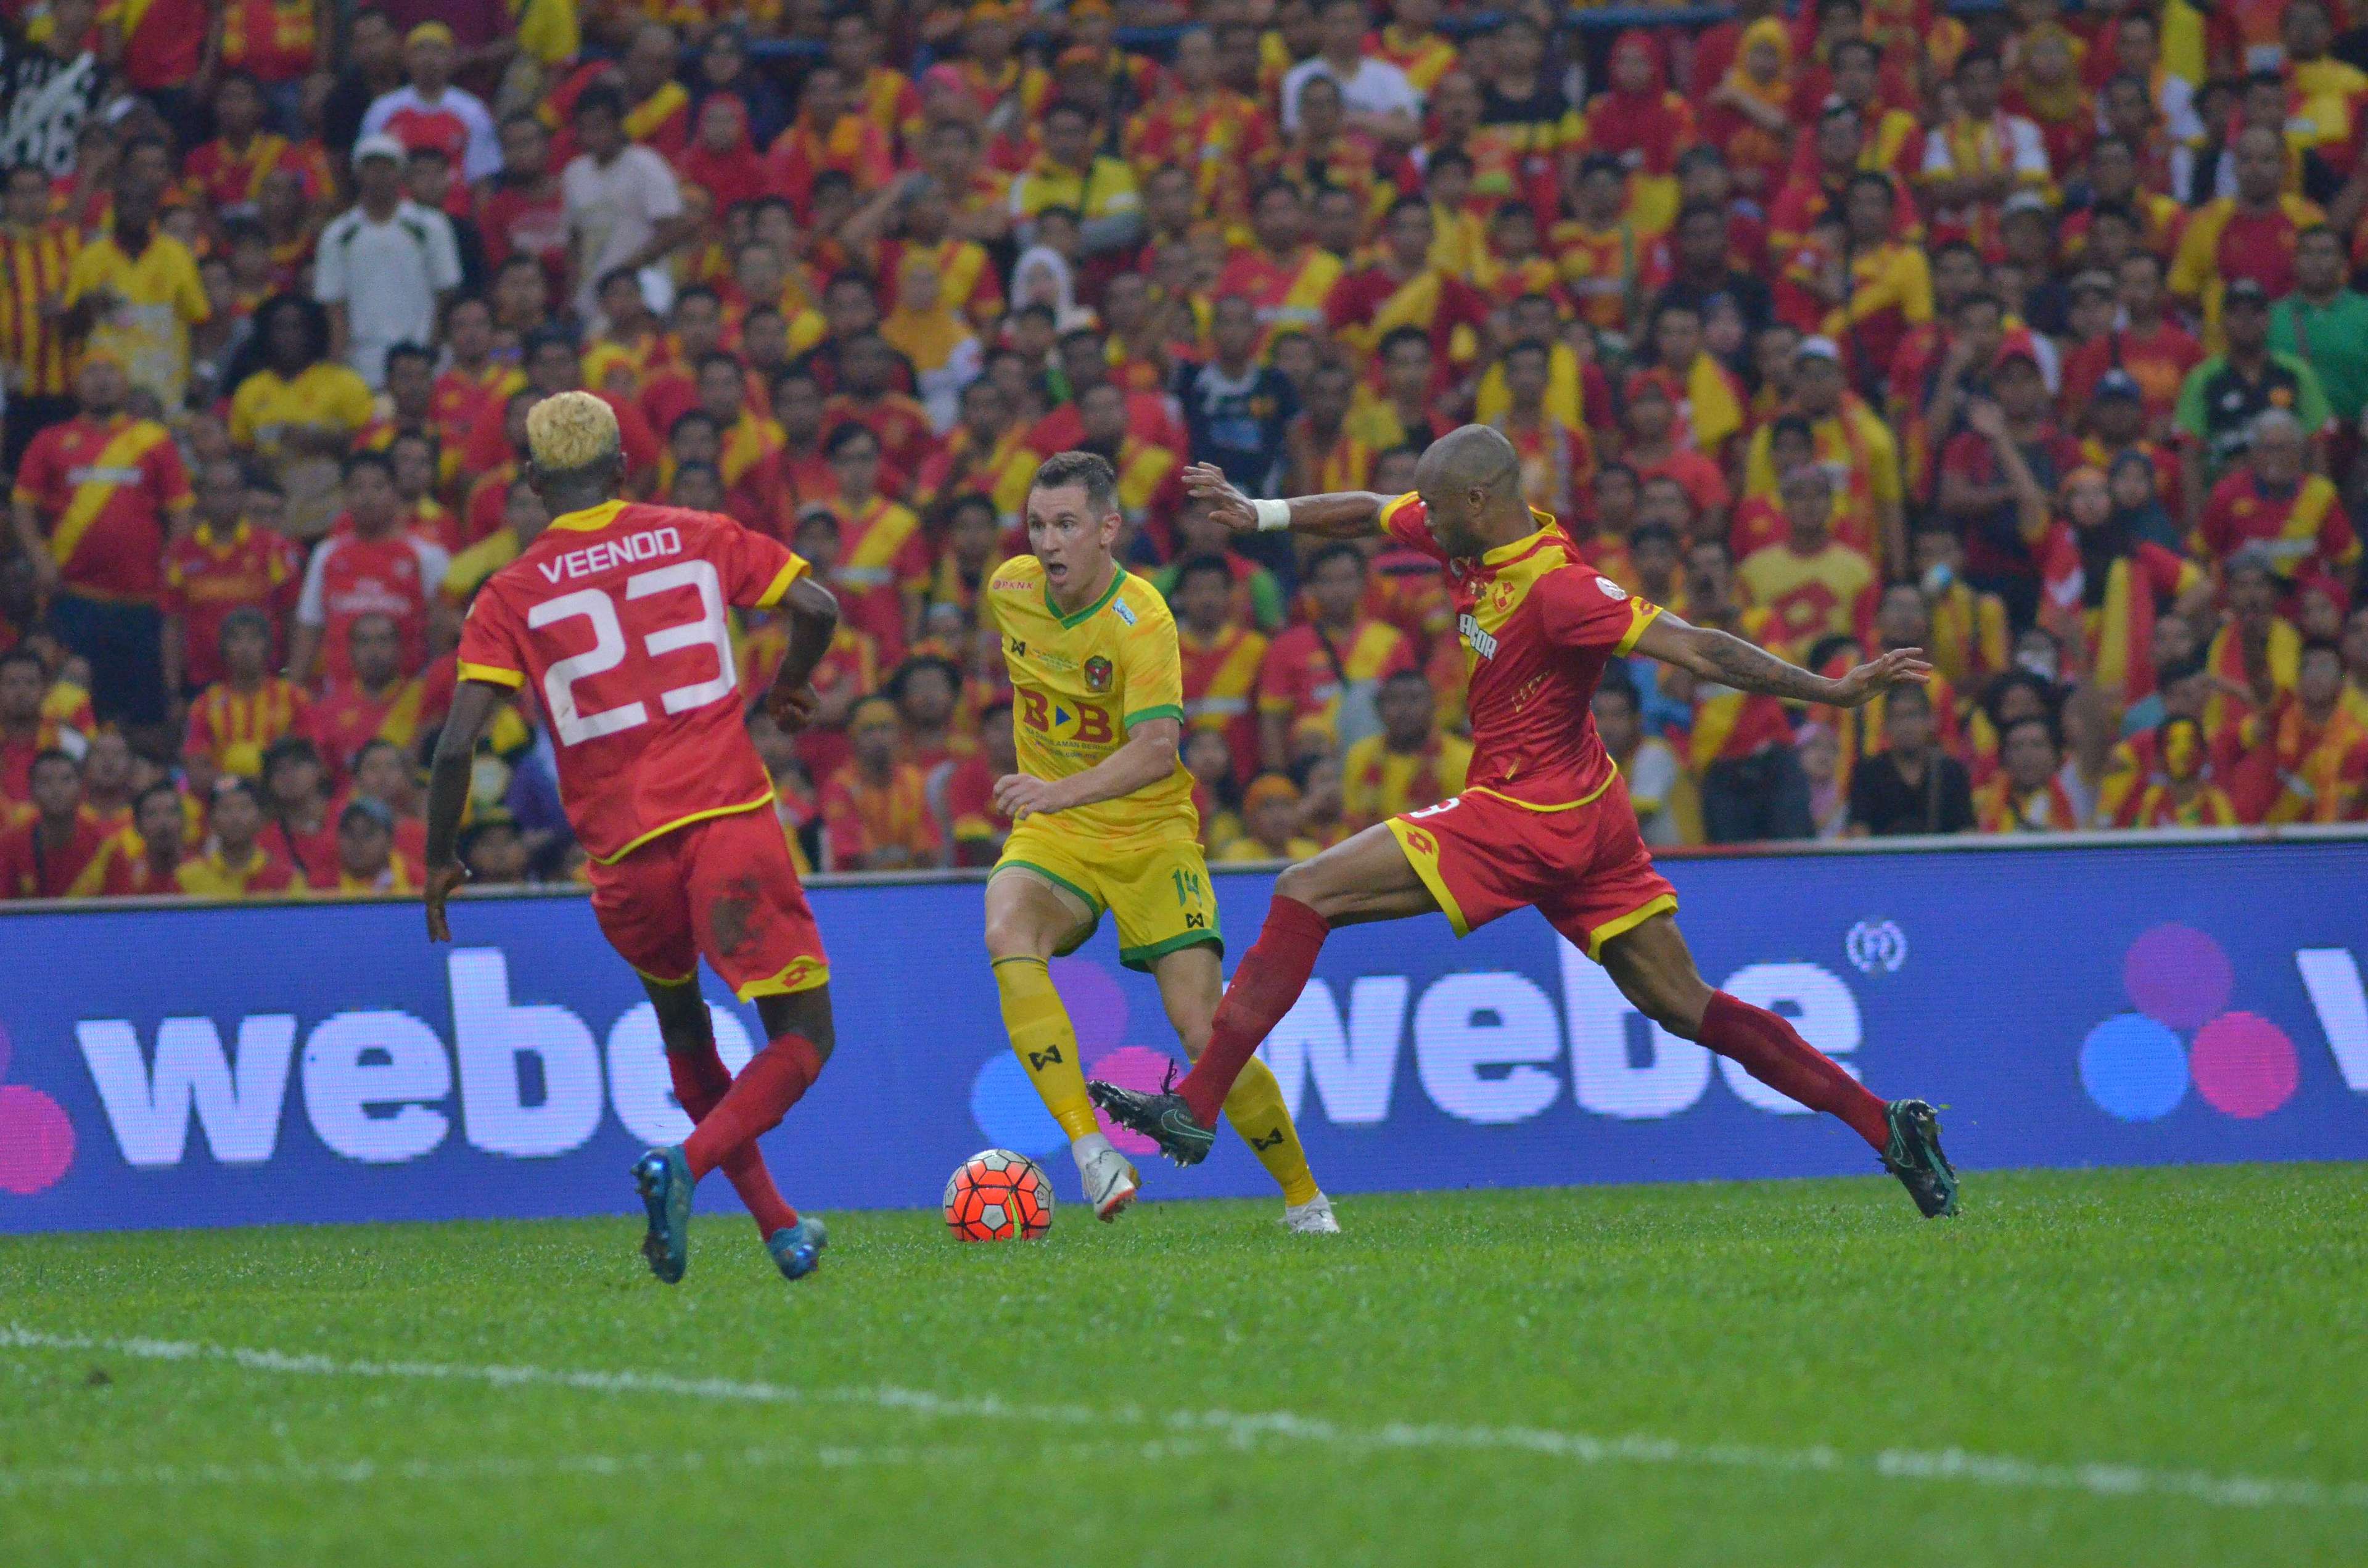 Kedah's Shane Smeltz being marked by Selangor's Ugo Ukah and S. Veenod in the Malaysia Cup final 30/10/16